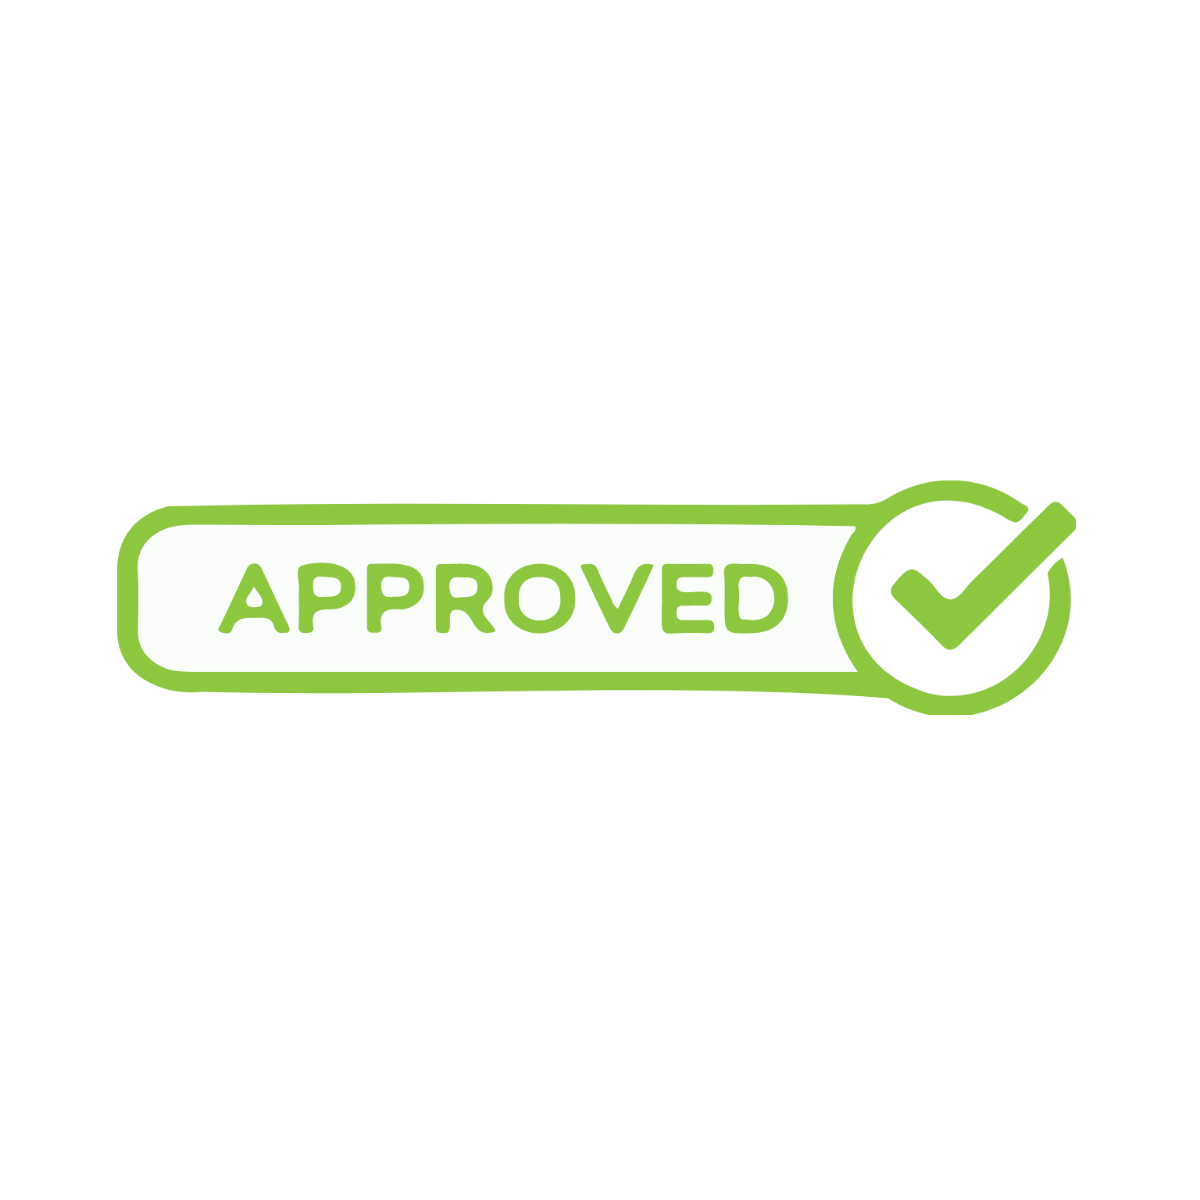 Tick Mark Approved clipart Template